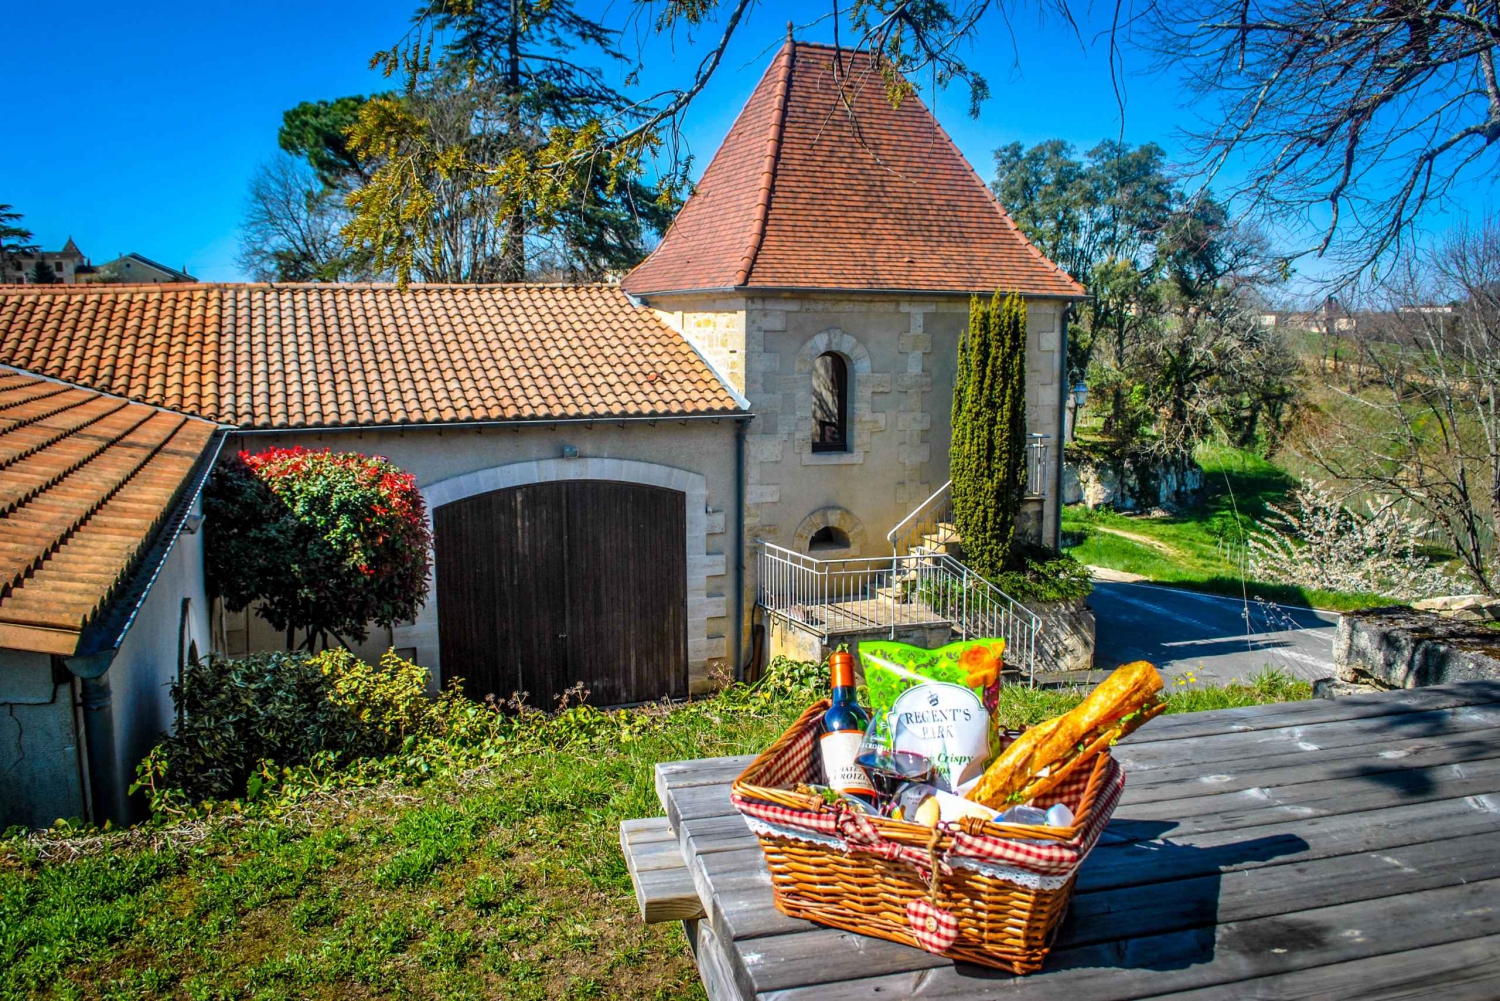 Saint-Emilion: Guided Winery Visits and Picnic